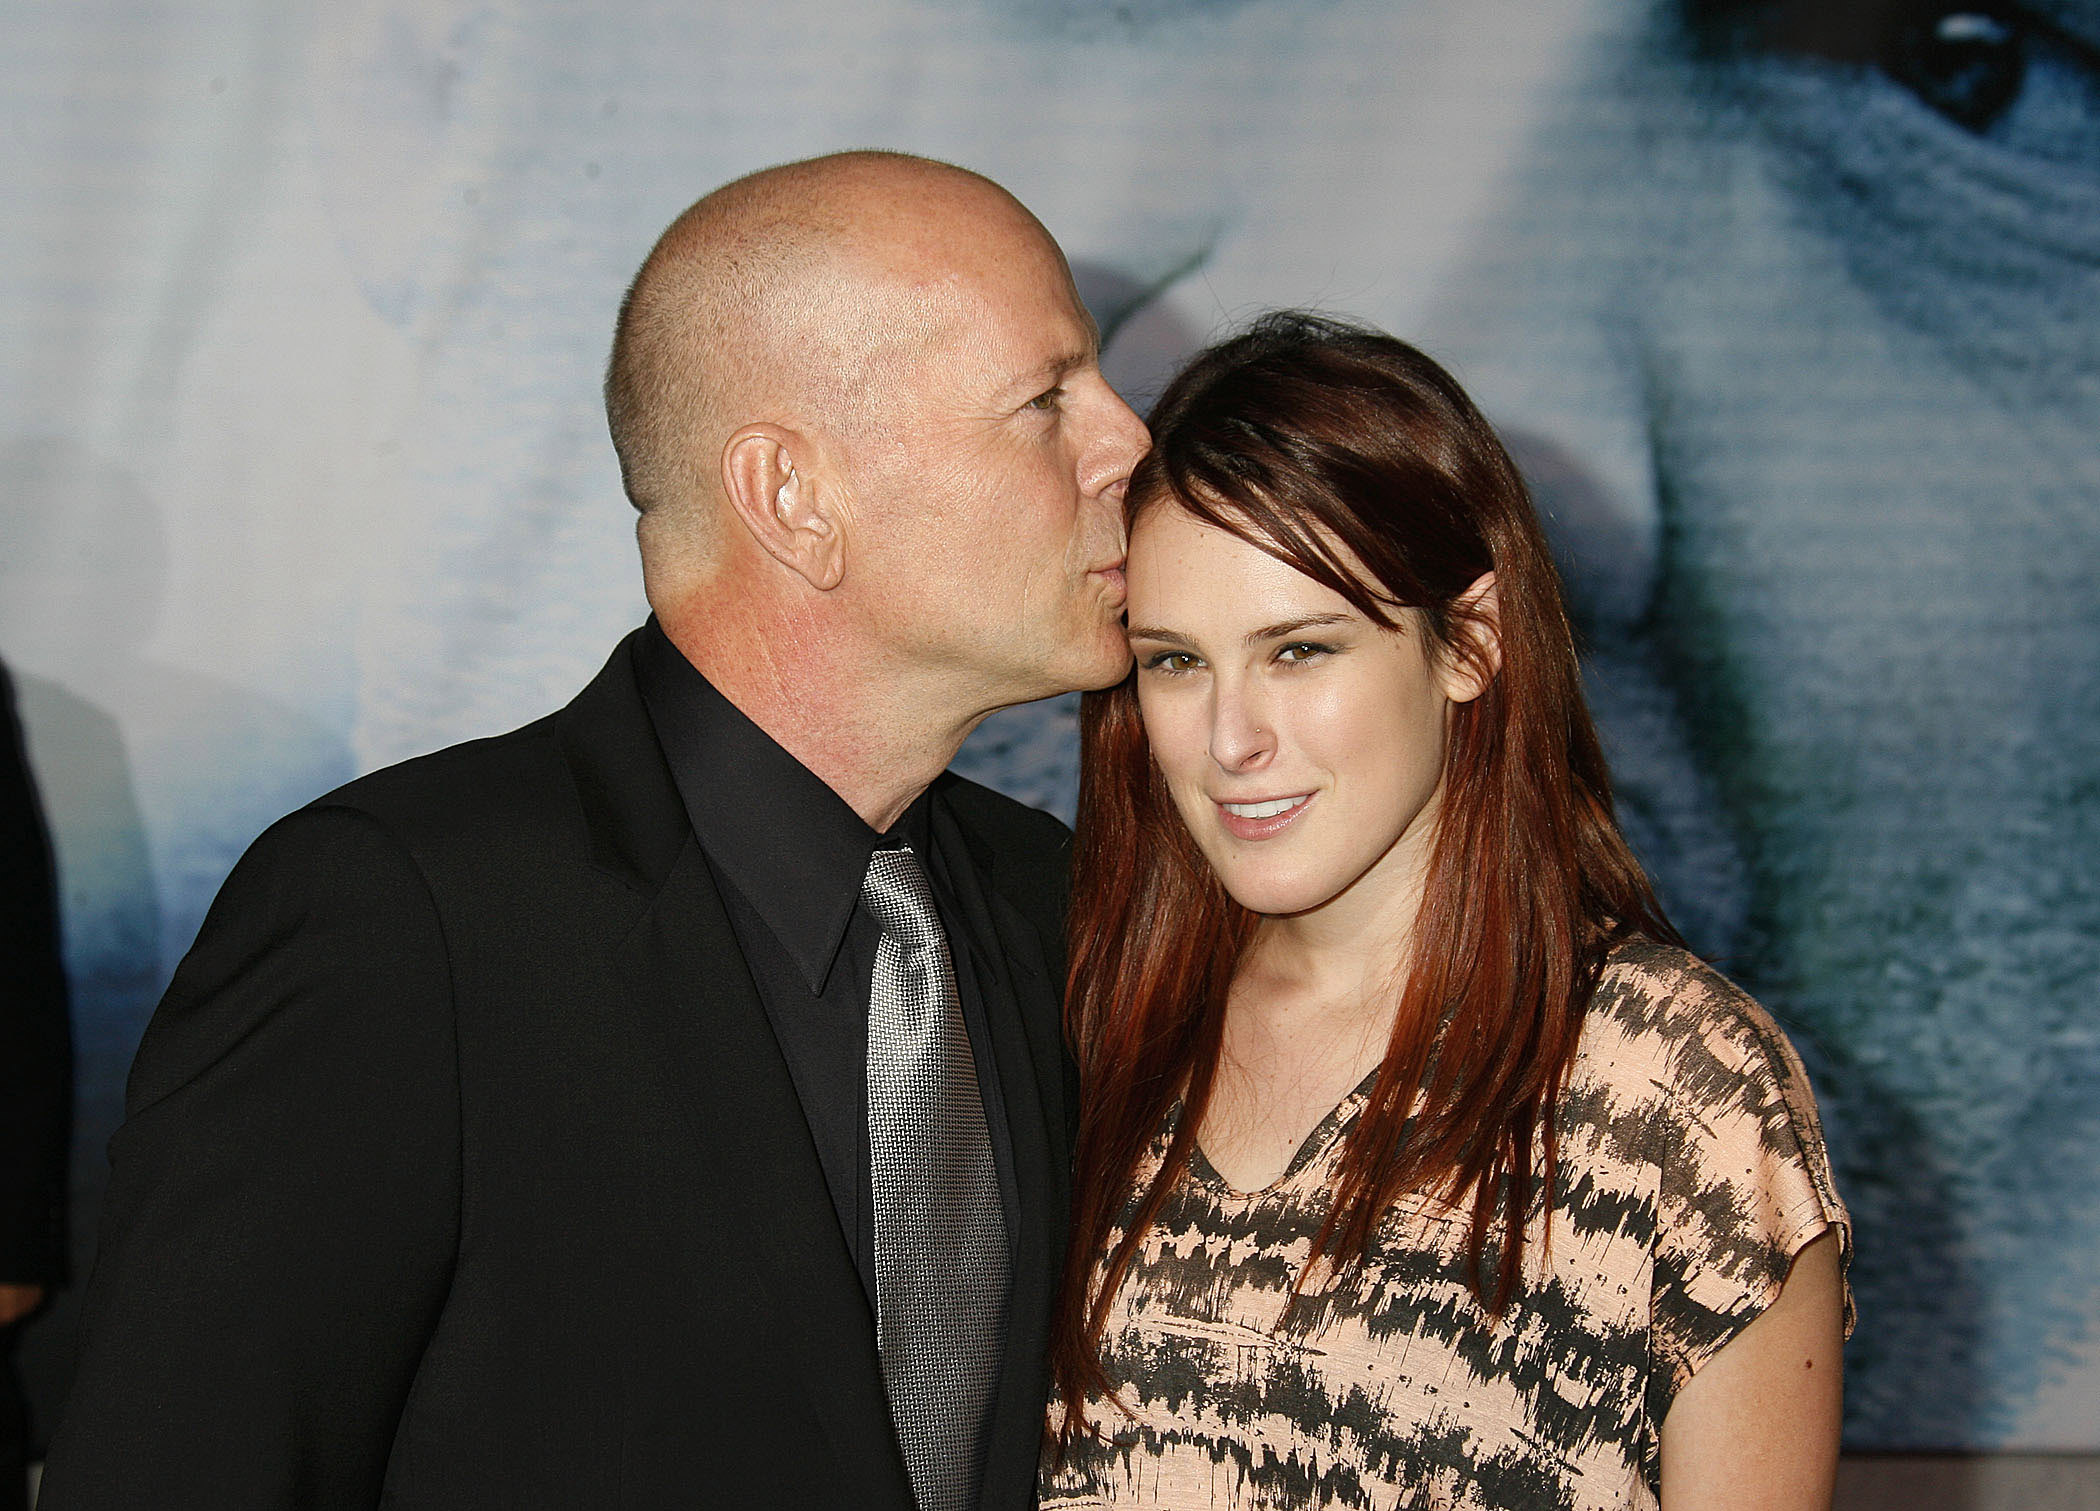 Bruce and Rumer Willis at the premiere of "Surrogates" at the El Capitan Theater in 2009 | Source: Getty Images